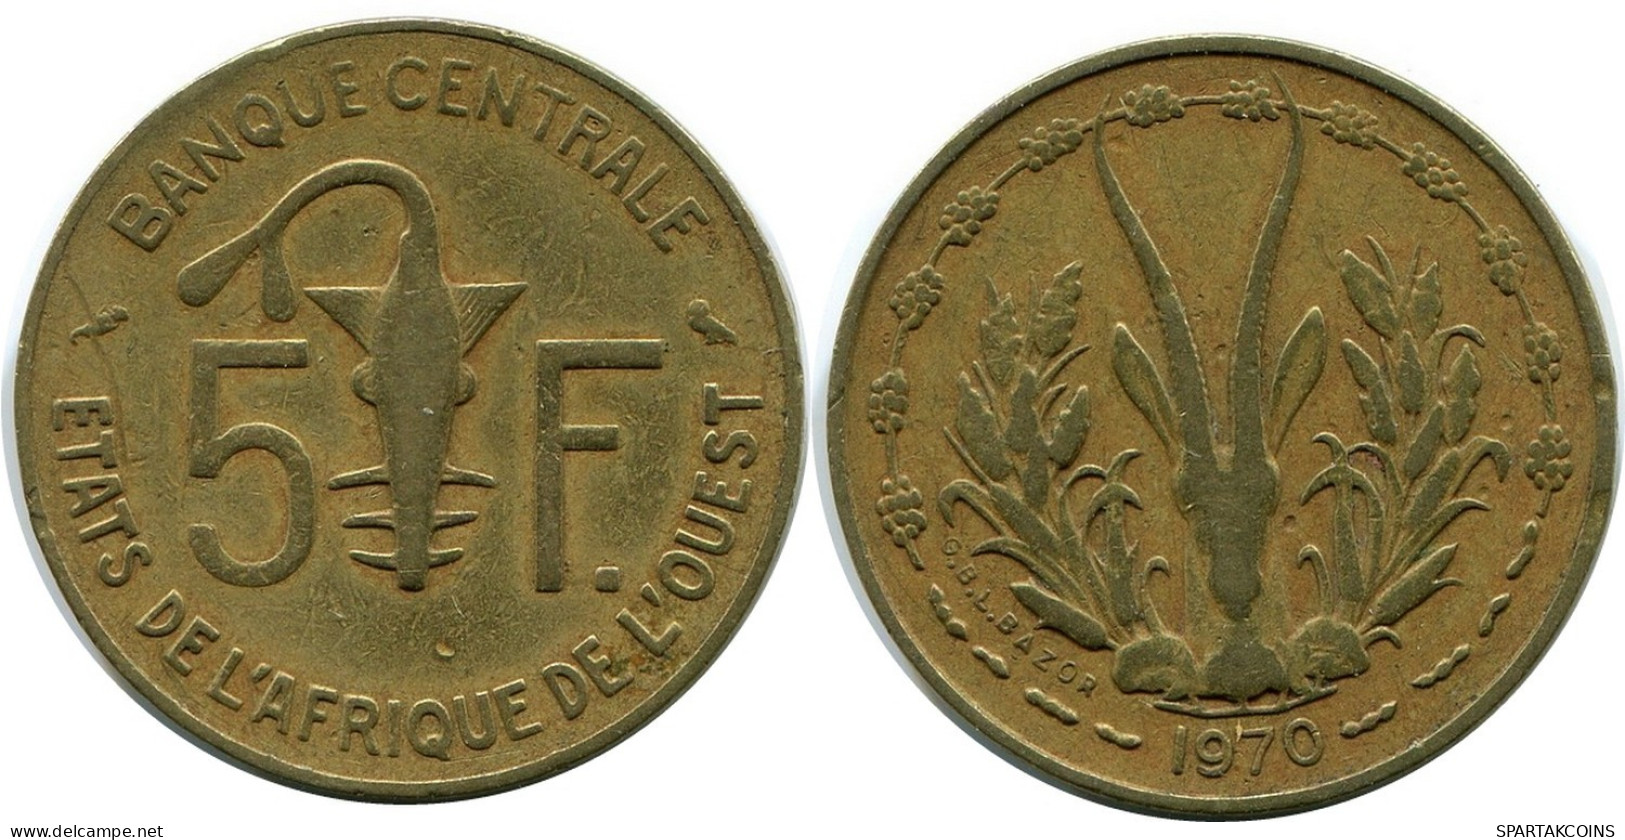 5 FRANCS 1970 WESTERN AFRICAN STATES Münze #AR264.D.A - Other - Africa